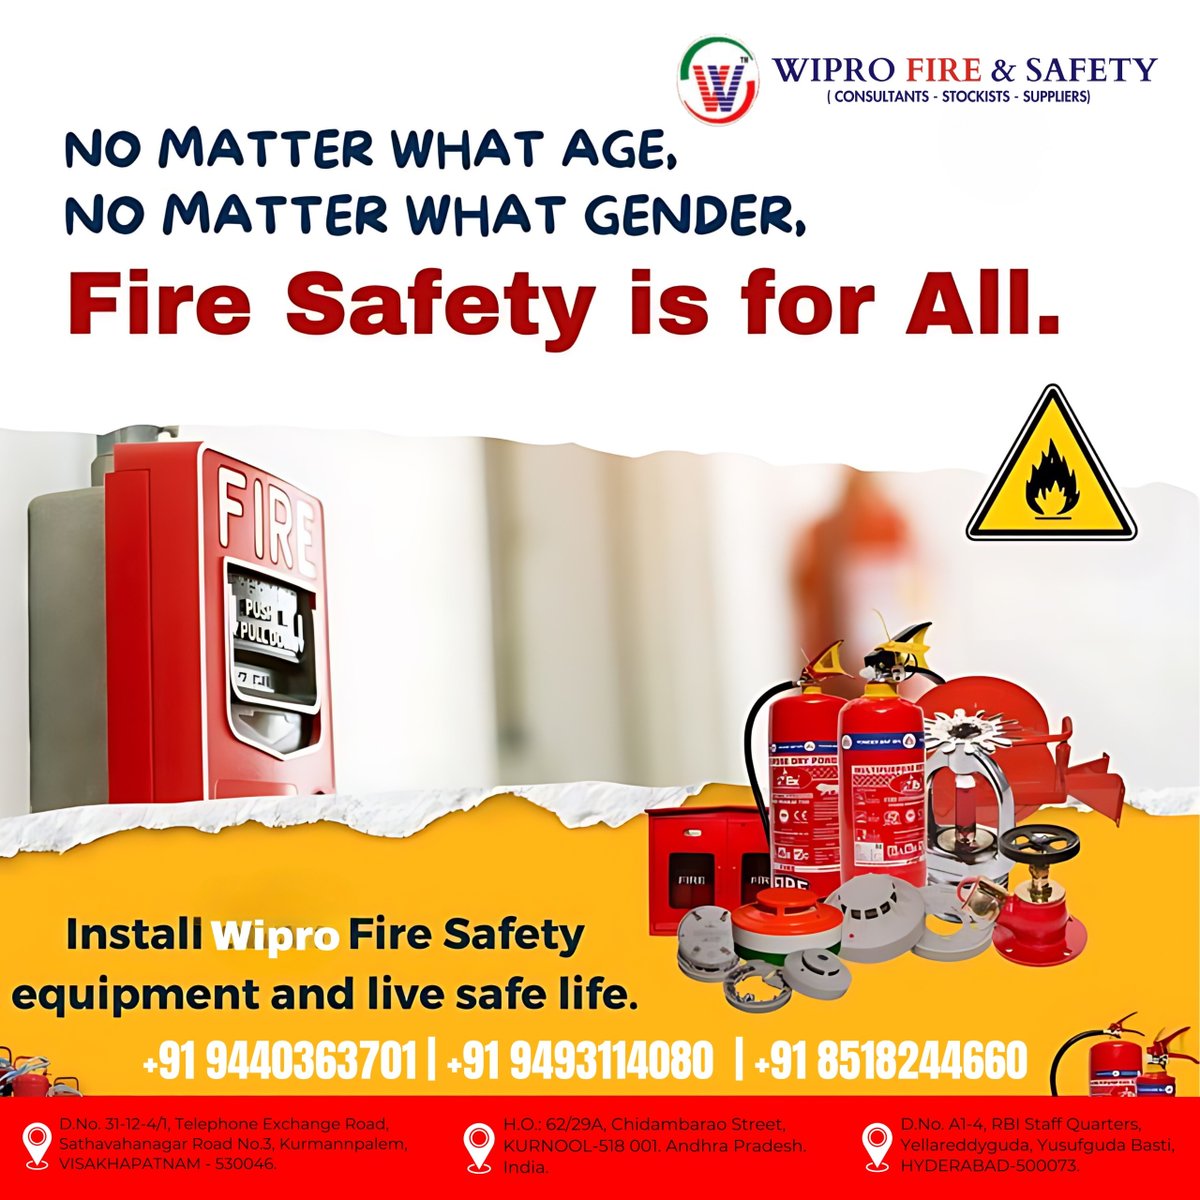 🔥 NO MATTER WHAT AGE, NO MATTER WHAT GENDER, Fire Safety is for All. 🔥
Install Wipro Fire Safety equipment and live a safe life.

📞 Contact Us:
+91 9440363701 | +919493114080 | +918518244660
📍 Locations:

#FireSafety #WiproFireSafety #SafetyFirst #FireSafetyEquipment